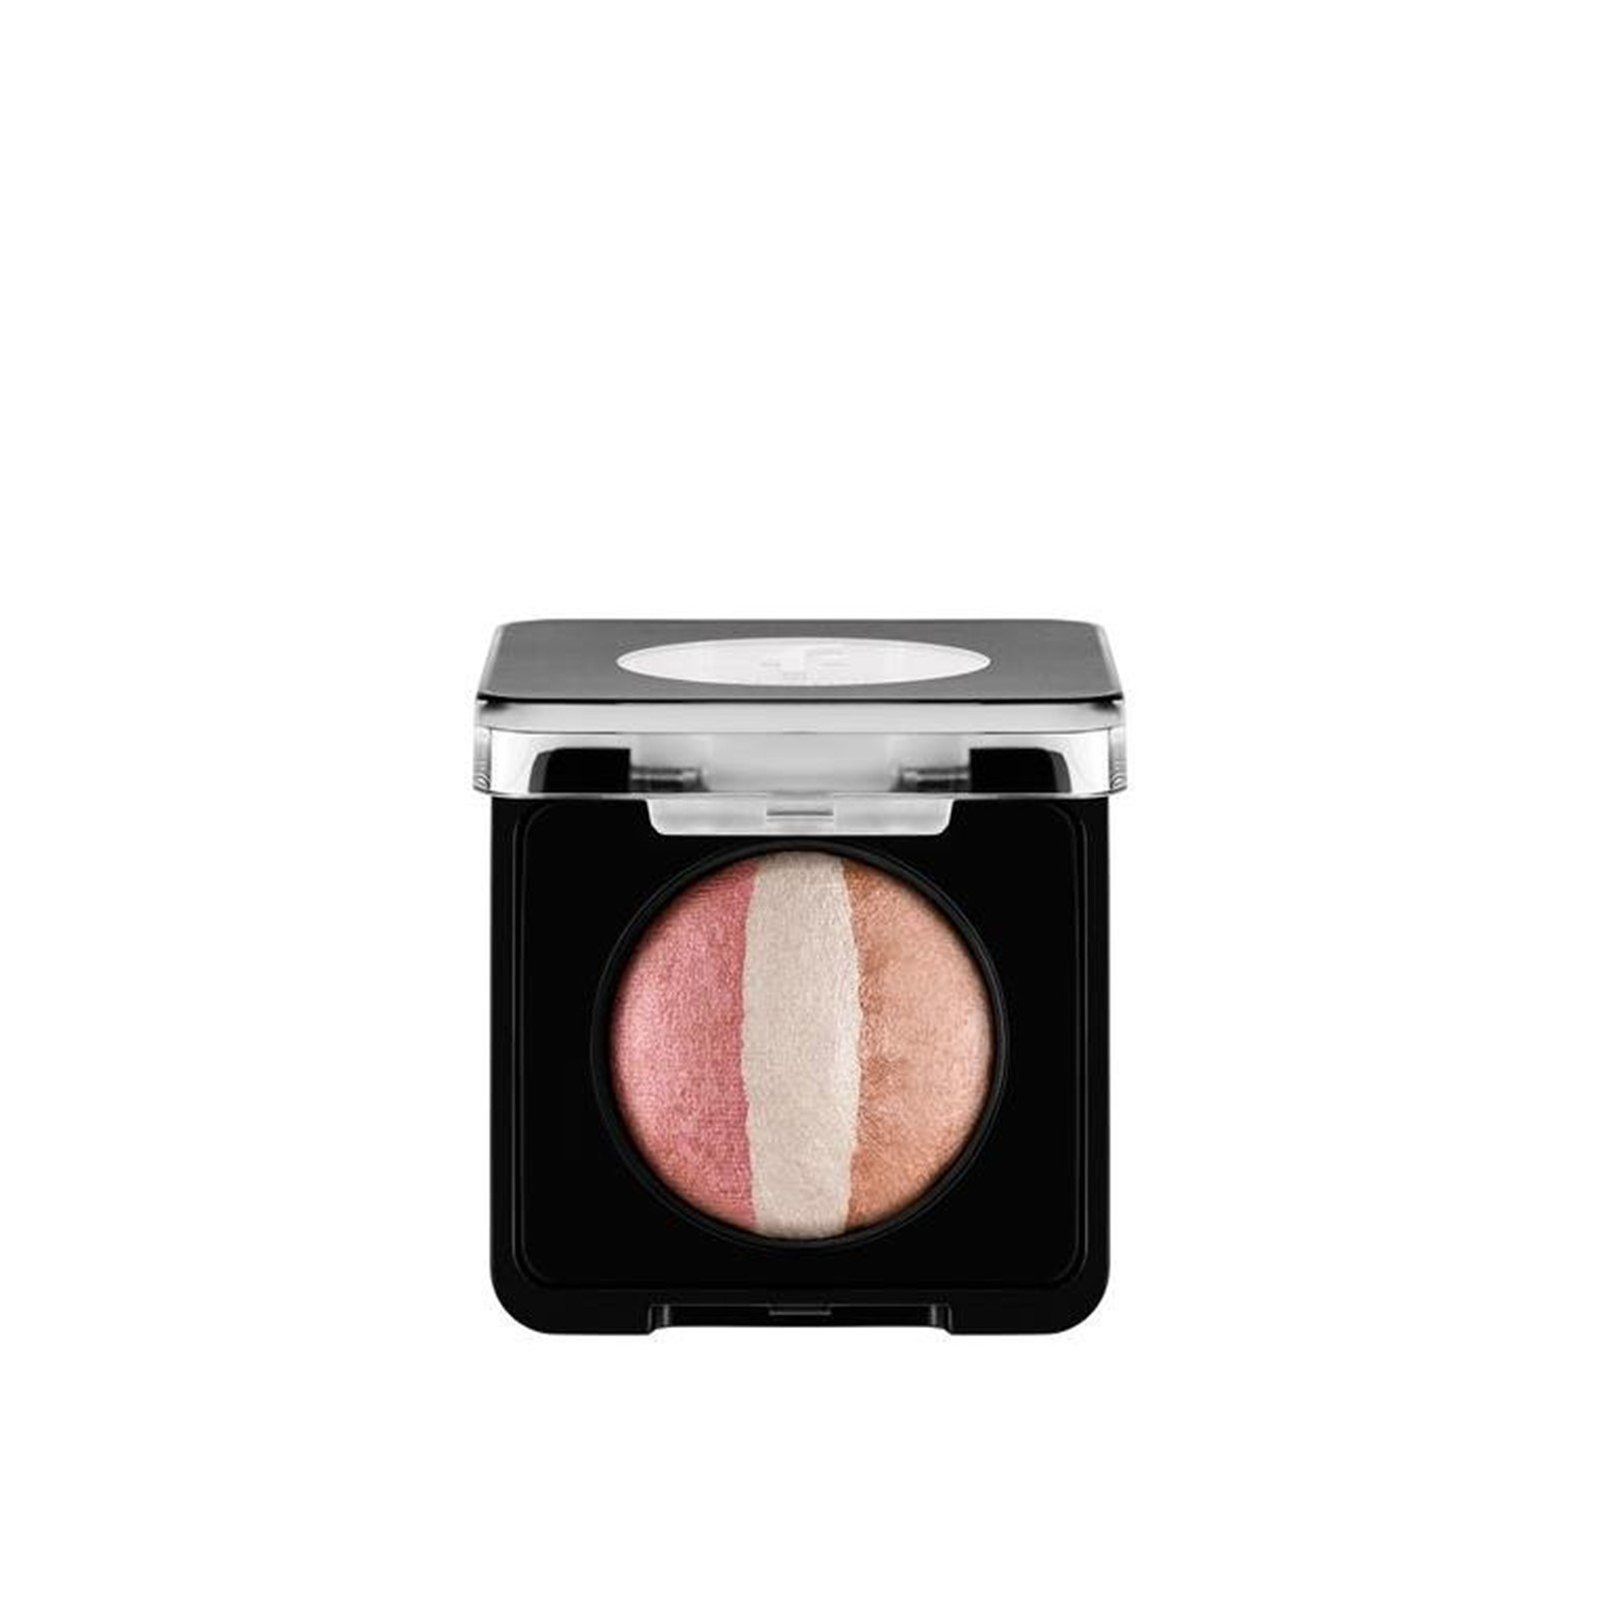 Flormar Baked Blush-On 053 Pinky Trio 4g